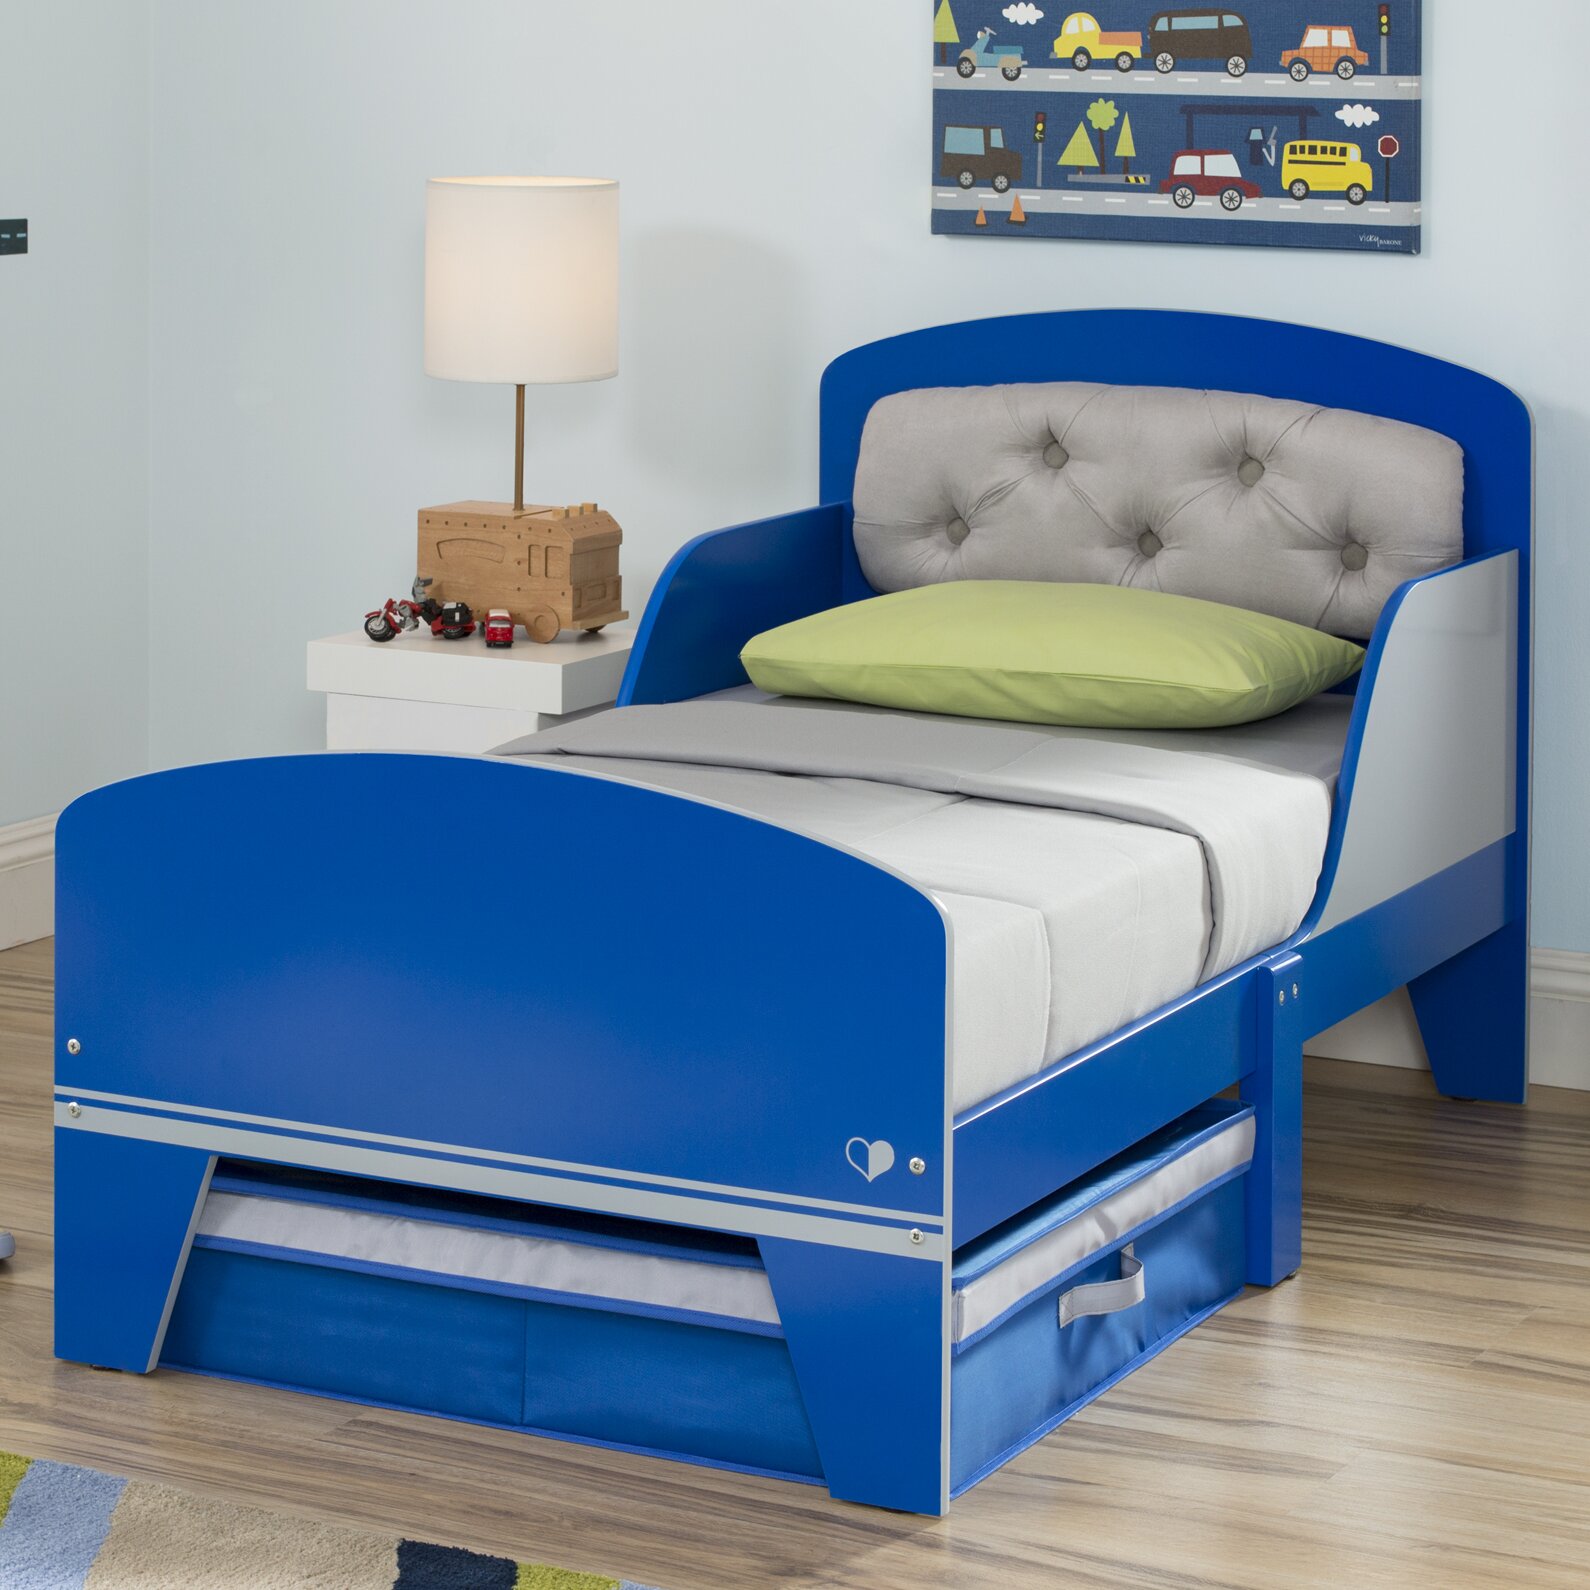 Delta Children Jack and Jill Toddler Bed with Storage & Reviews | Wayfair